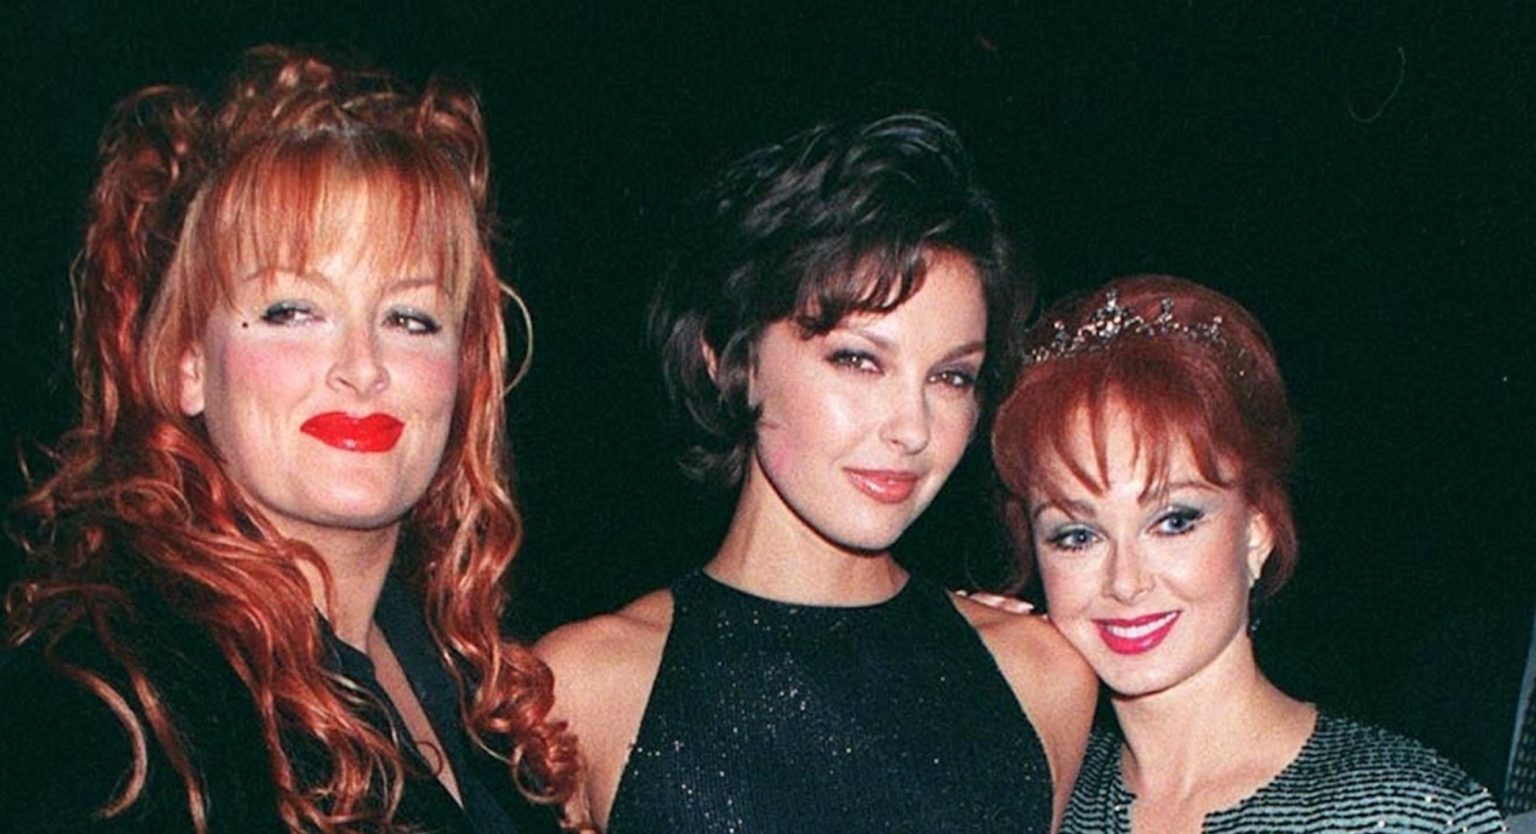 Ashley-And-Wynonna-Judd-Share-Heartbreaking-News-of-Their-Mother-Naomi-Judds-Death-1536x834